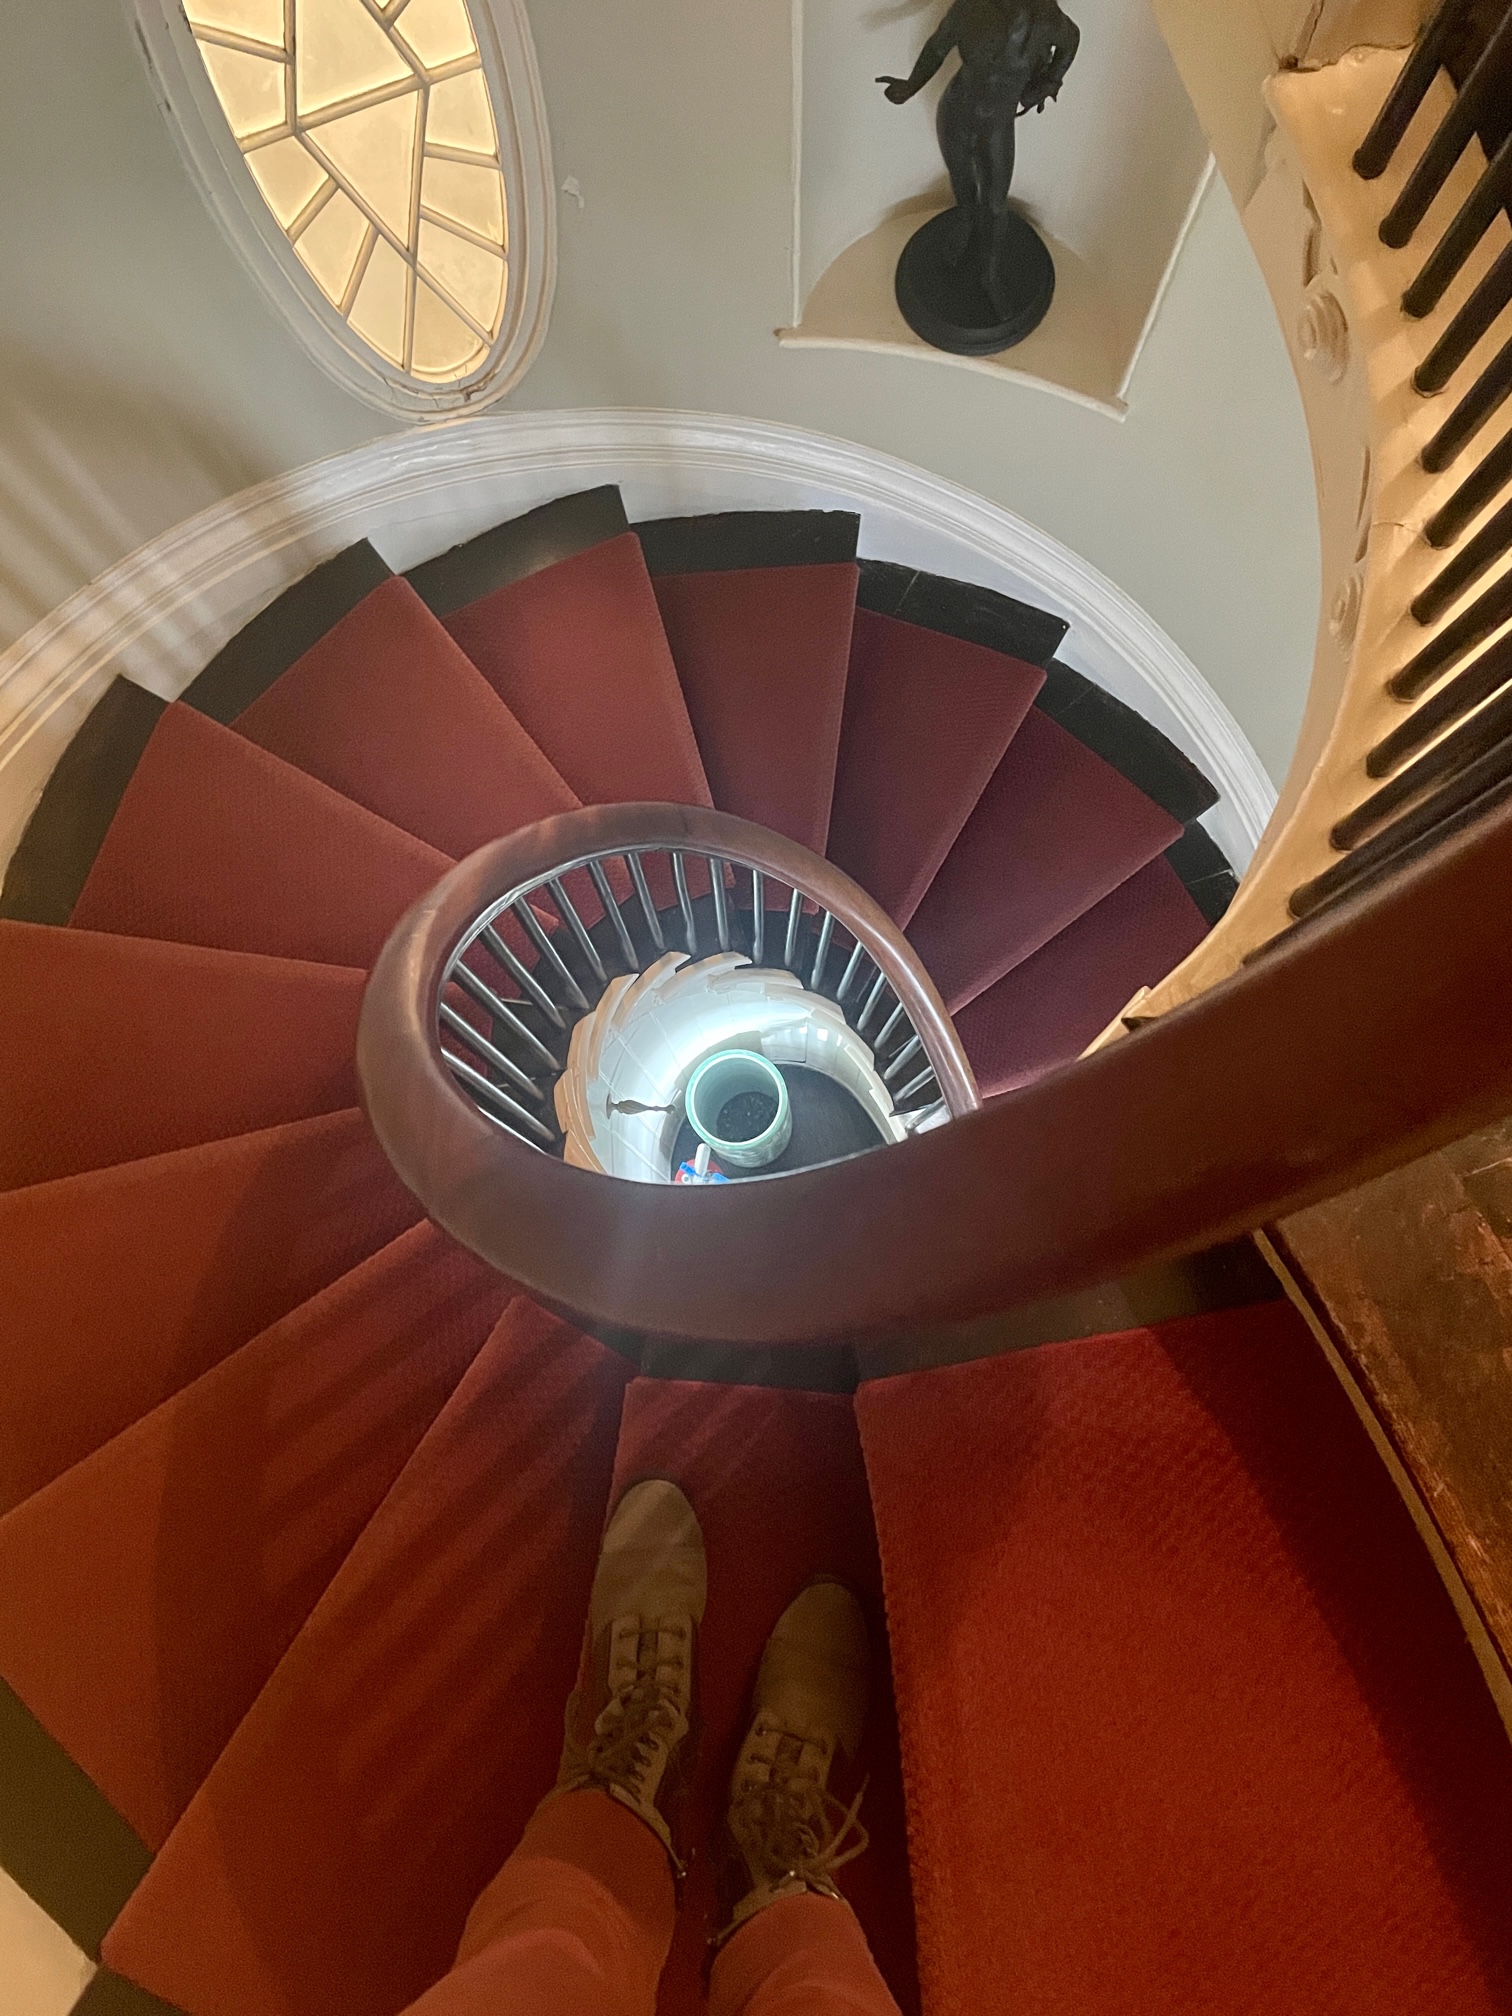 Looking down a spiral staircase with a red carpet. A pair of feet is walking down.